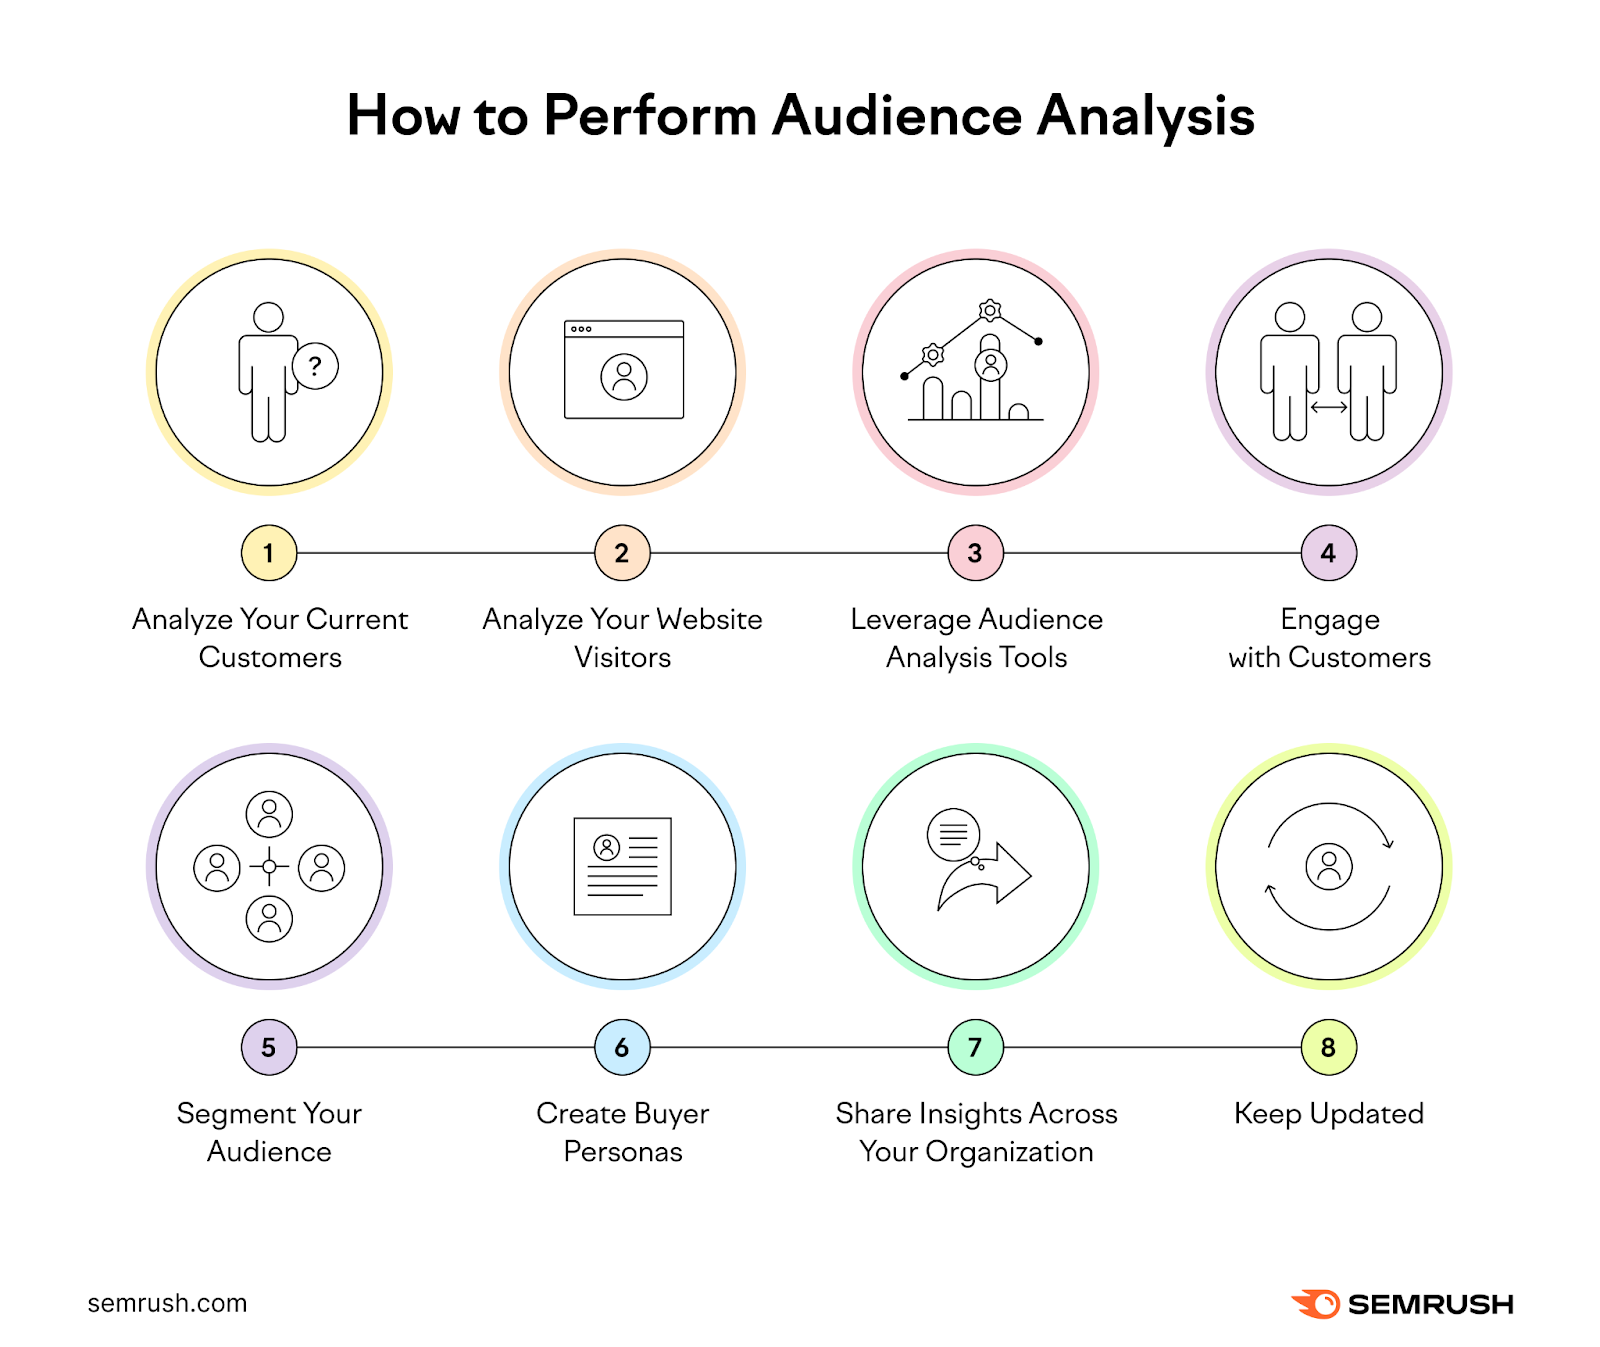 How to perform audience analysis